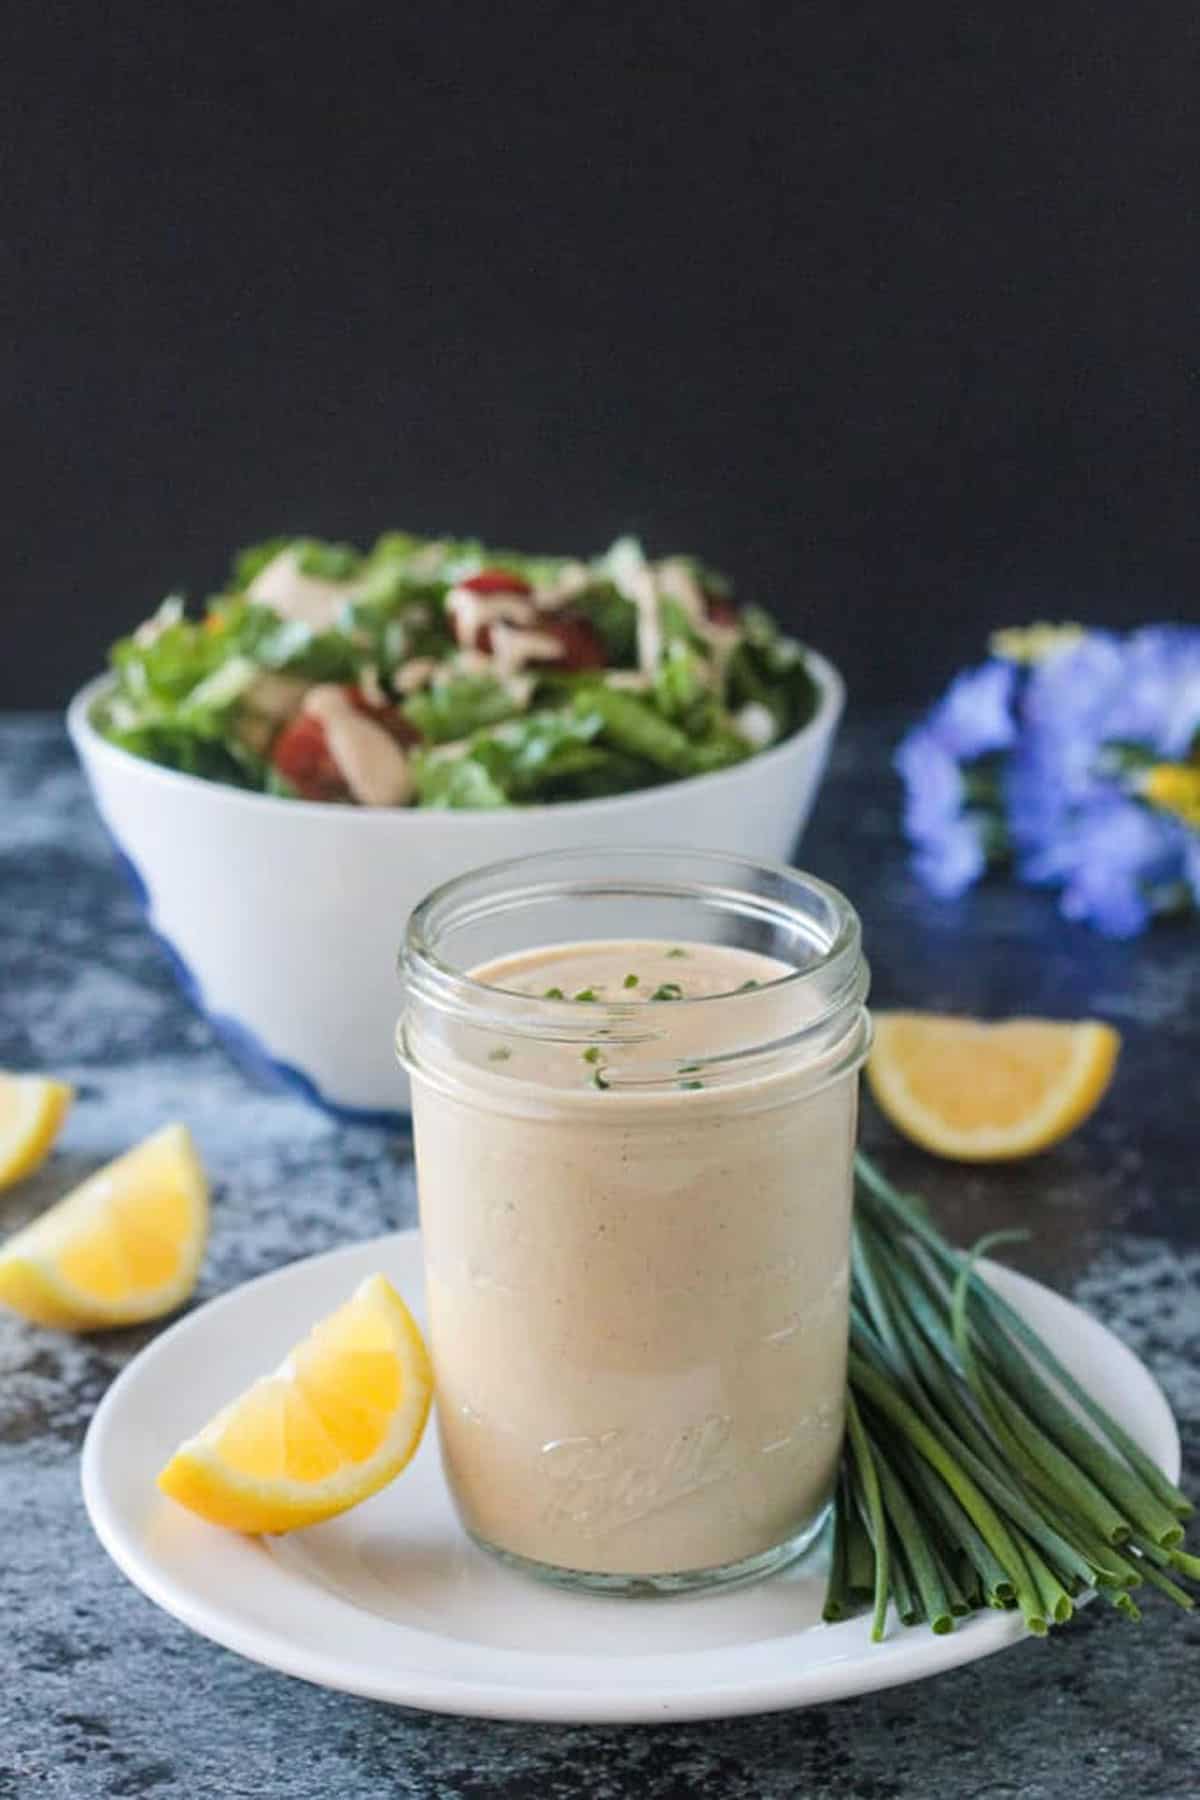 Jar of creamy sauce in front of a bowl of salad.